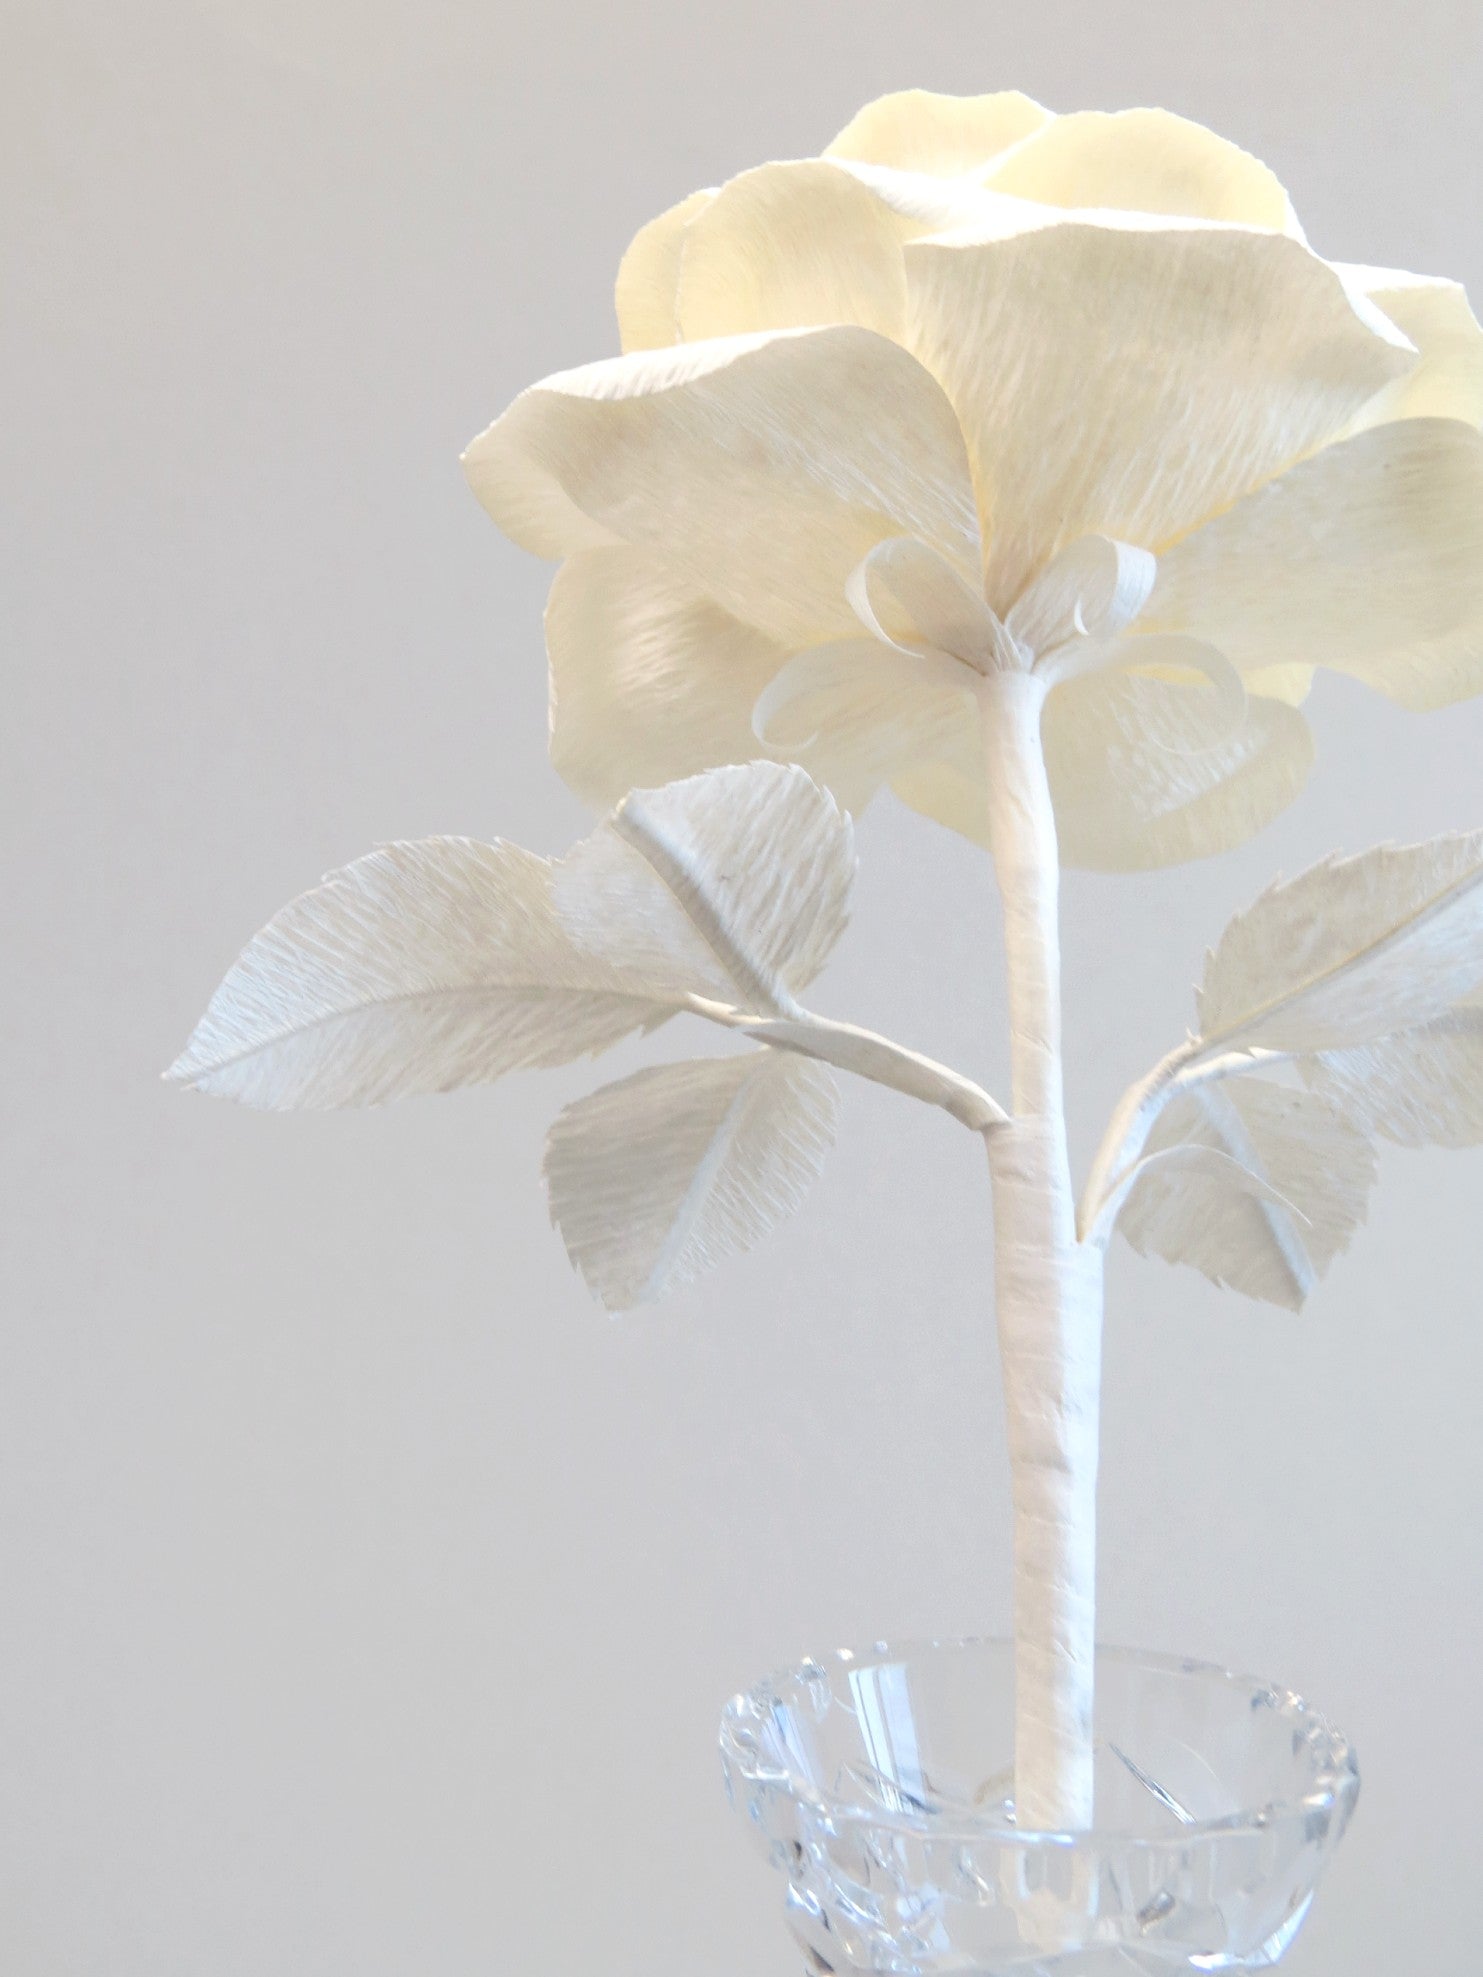 The underneath of the ivory crepe paper rose showing the ivory calyx with the ivory stem and the back of the ivory crepe paper leaves